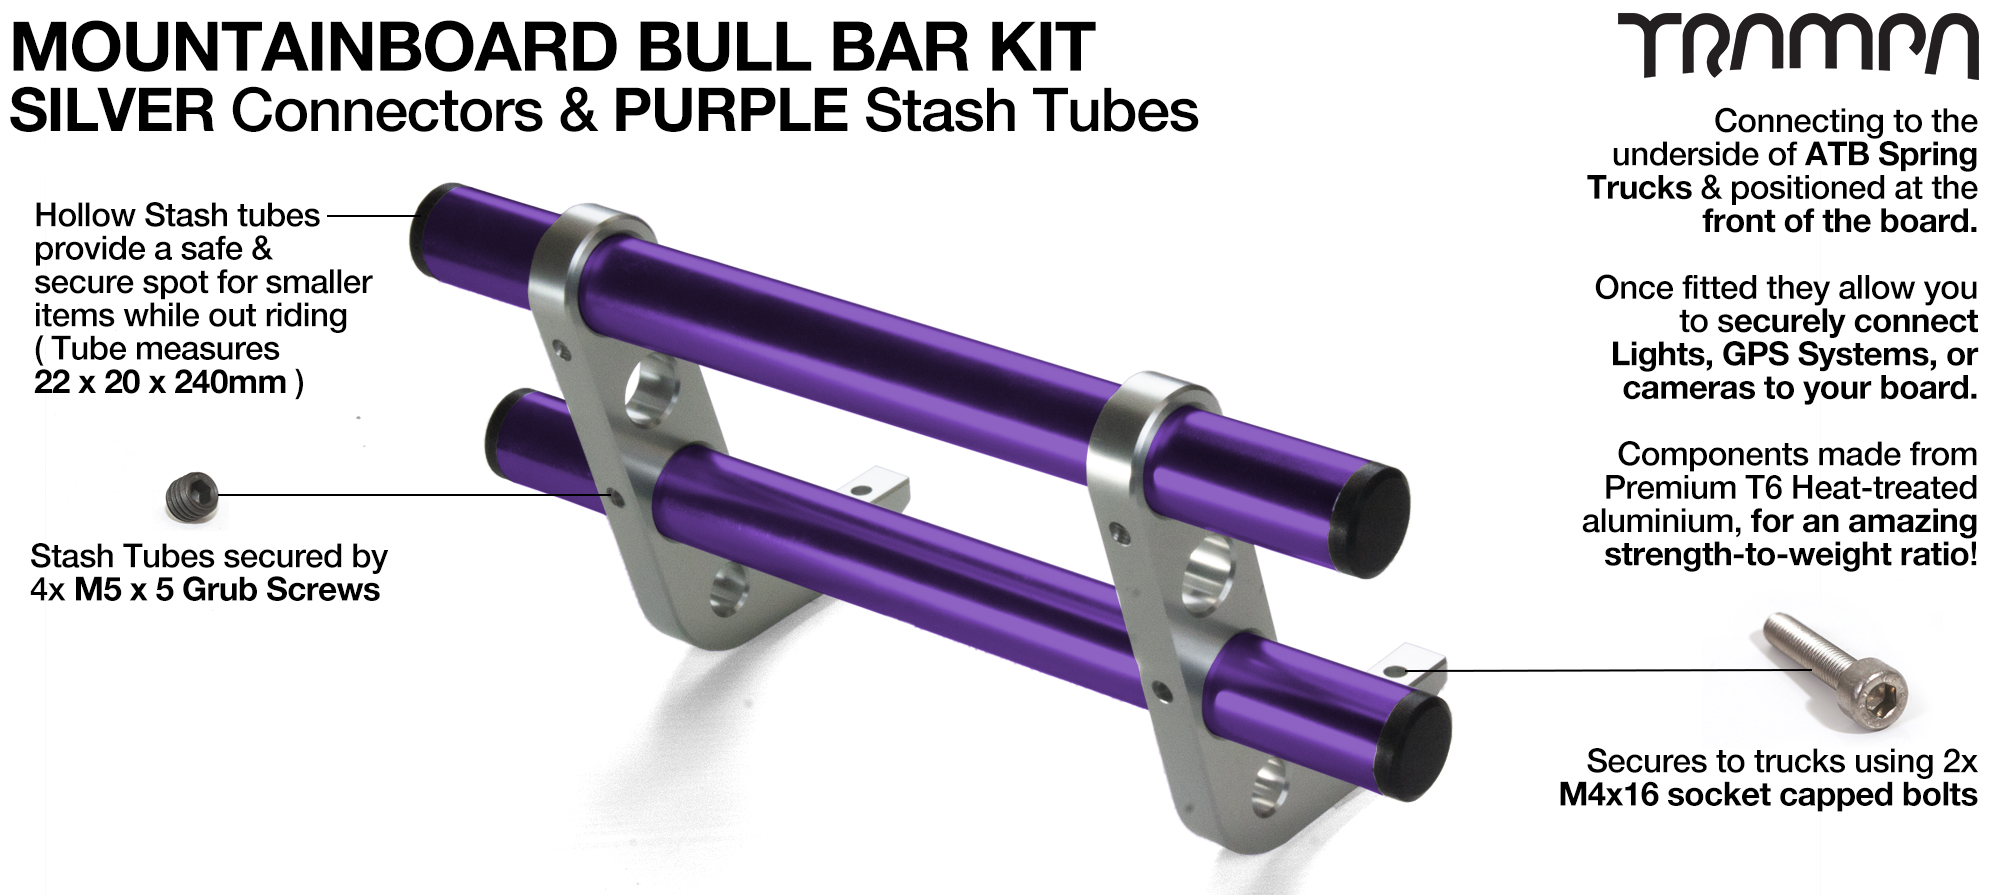 SILVER Uprights & PURPLE Crossbar BULL BARS for MOUNTAINBOARDS T6 Heat Treated CNC'd Aluminium Uprights, with Hollow Aluminium Stash Tubes with Rubber end bungs  